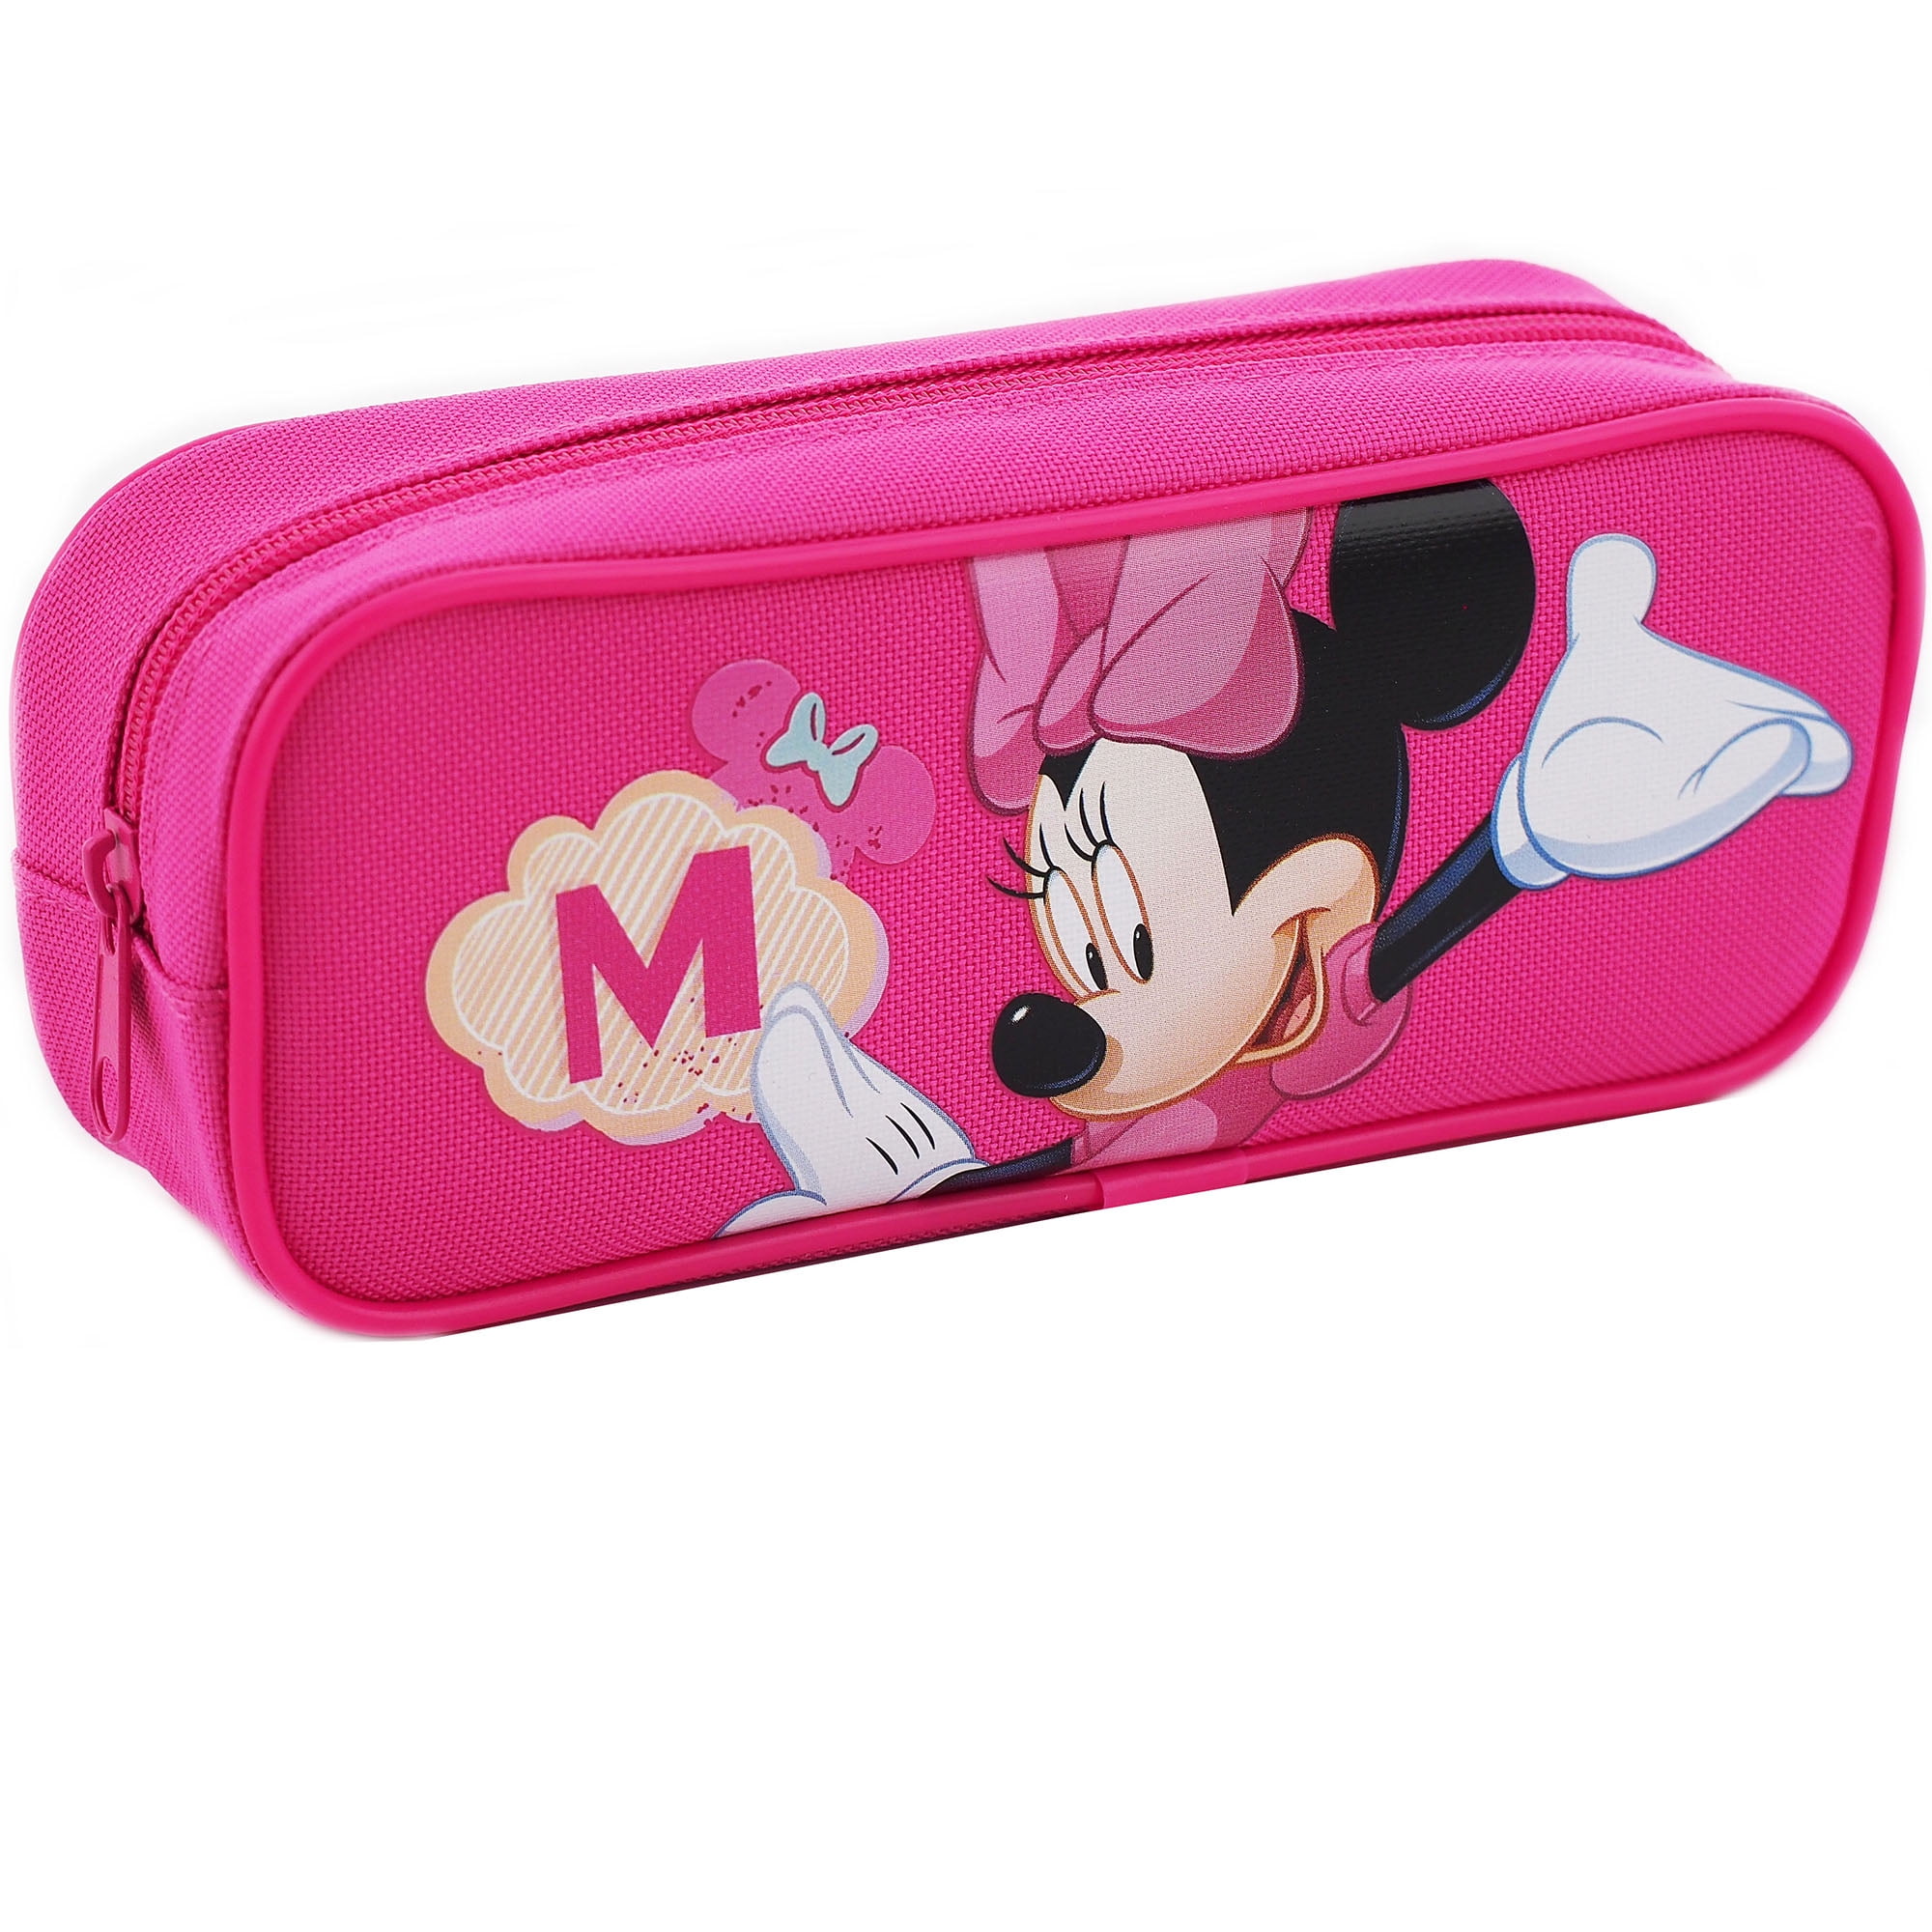 Disney Minnie Mouse Girls/Boys Authentic Licensed Pencil Case 